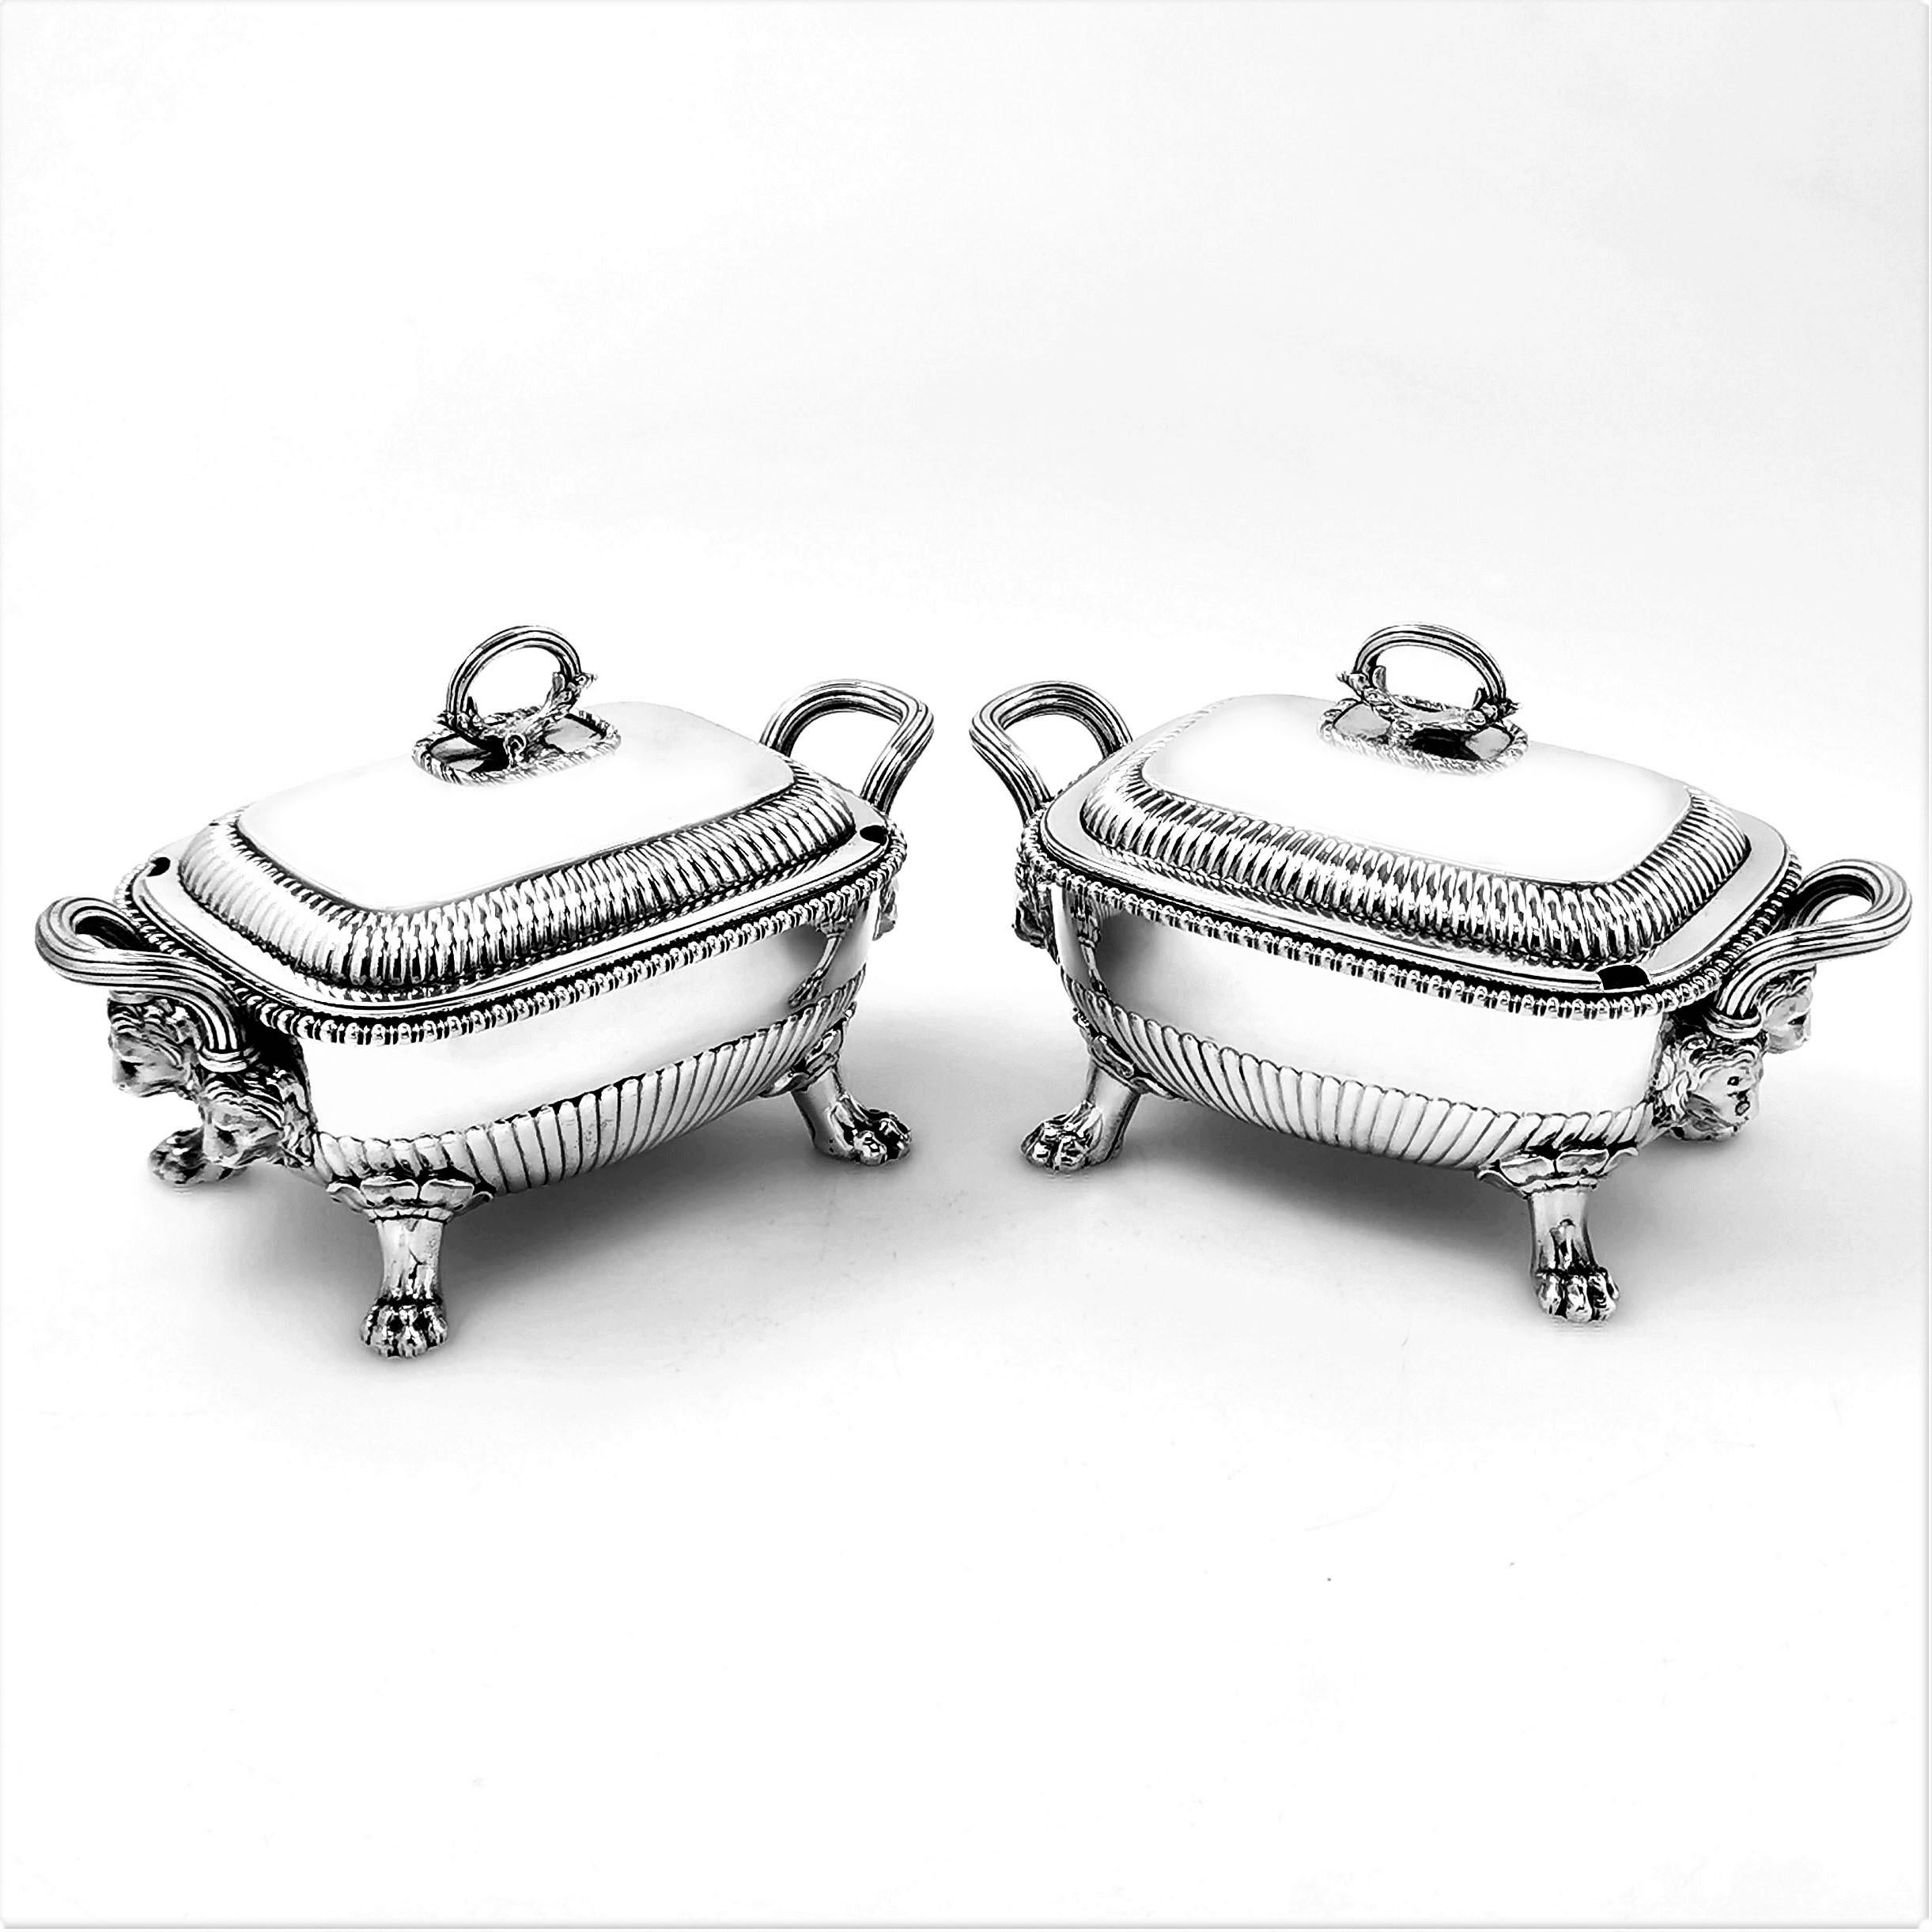 A pair of antique George III solid Silver Sauce Tureens featuring a classic fluted design on the lid and base. The Body of each Tureen features a pair of impressive handles each showing a pair of lion heads, and each tureen stands on four claw feet.